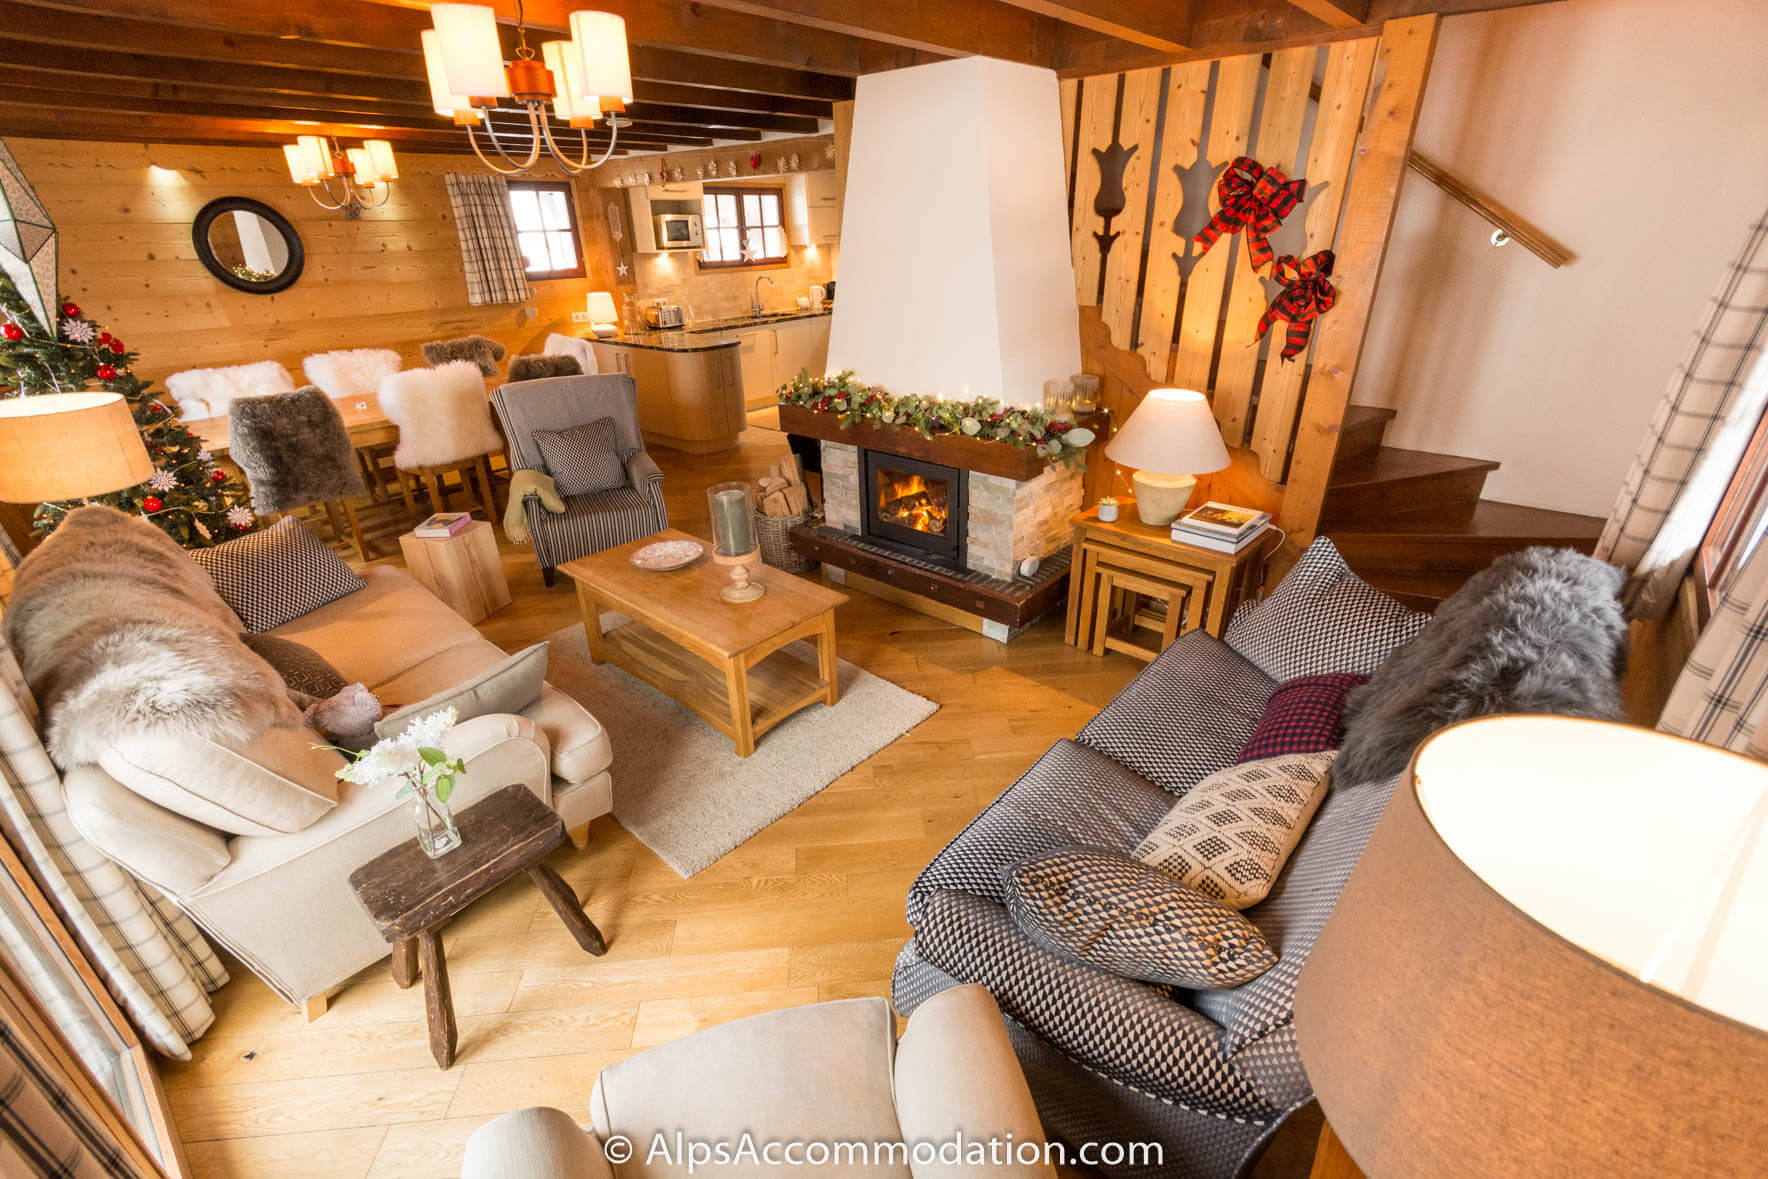 Chalet Étoile Morillon - The living area features comfortable sofas and a warming log fire